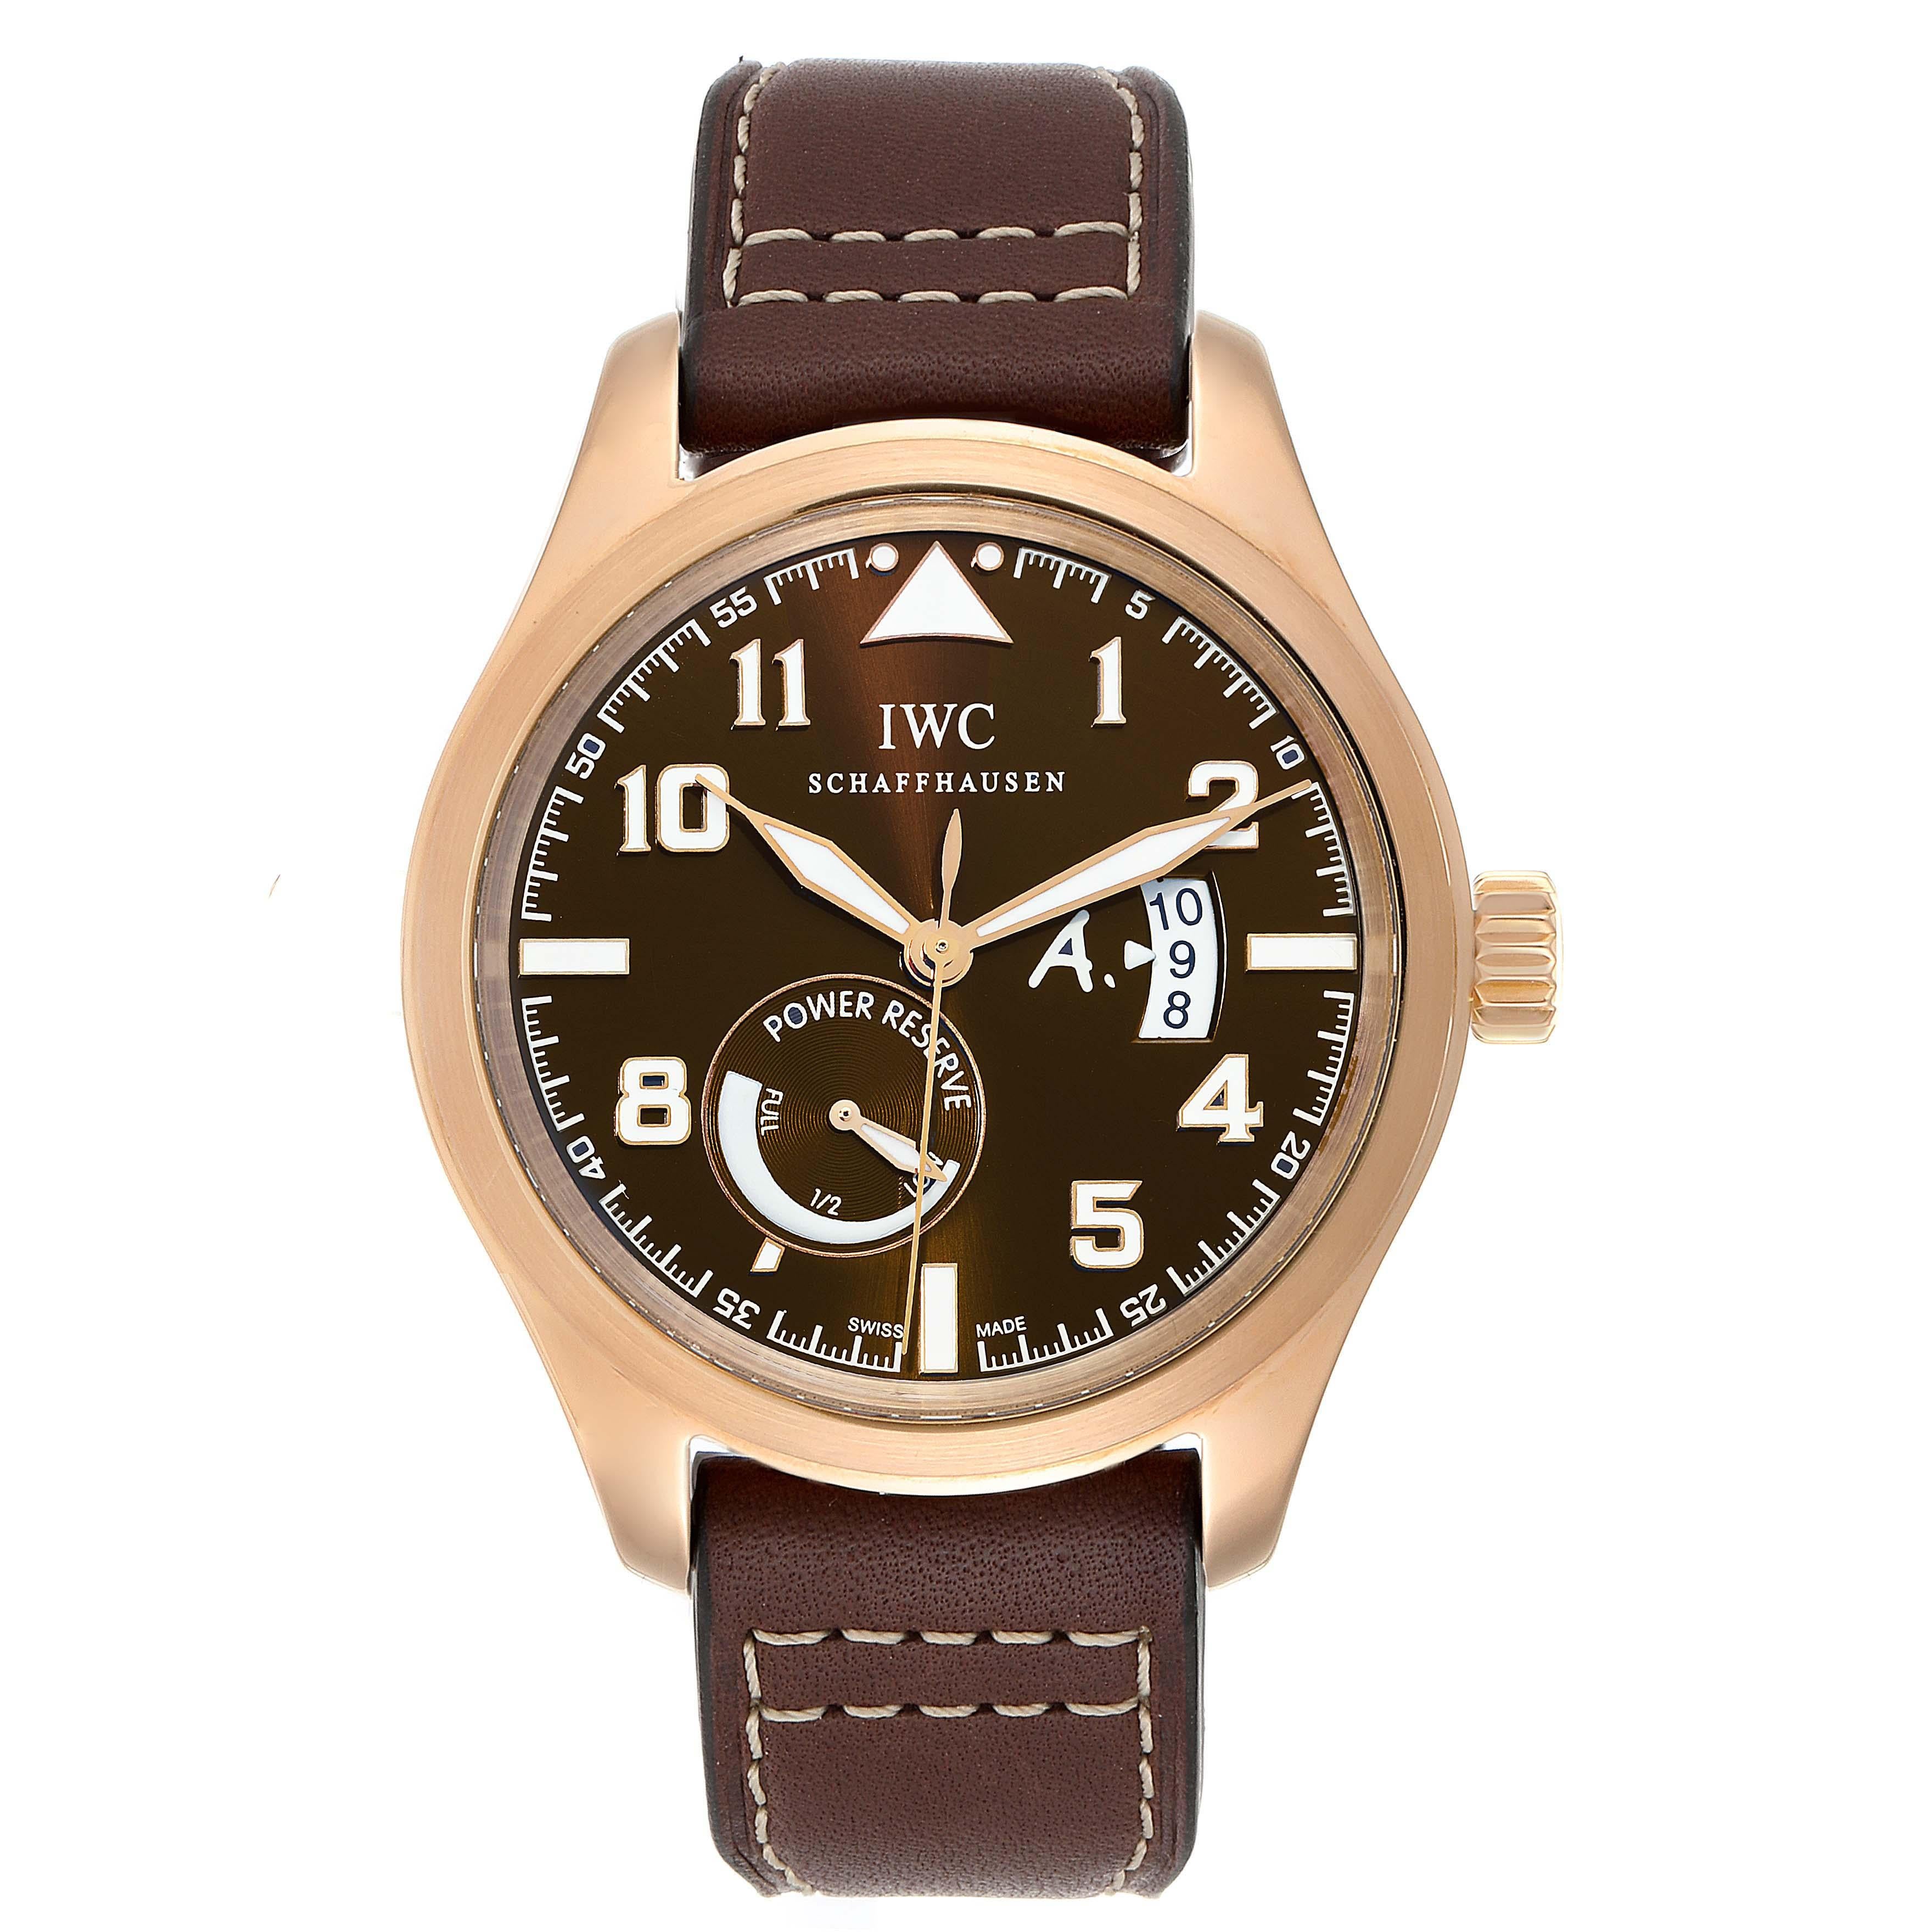 IWC Pilot Saint Exupery Rose Gold Limited Edition Watch IW320103 Card. Automatic self-winding movement. 18K rose gold case 44.0 mm in diameter. Downturned lugs. Screw-down solid case back with the engraved map of St. Exupery's pioneering airmail